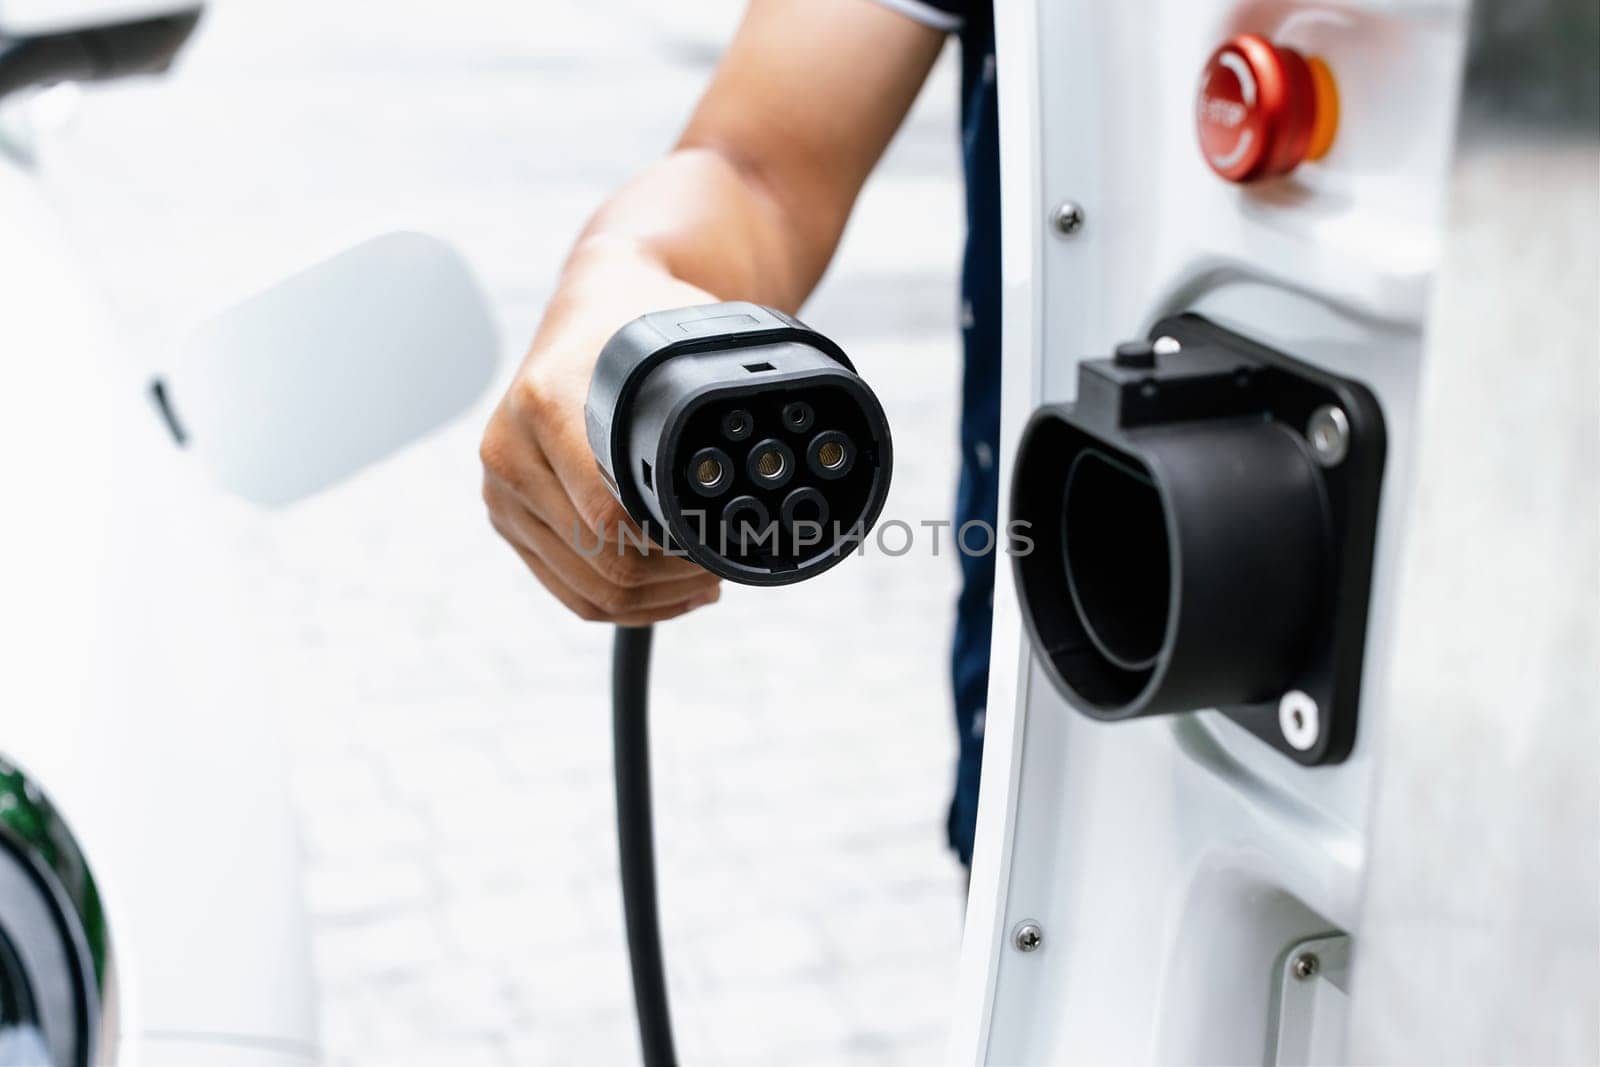 Progressive concept of hand attaches an emission-free power connector to the battery of electric vehicle at home. Electric vehicle charging via cable from charging station to EV car battery